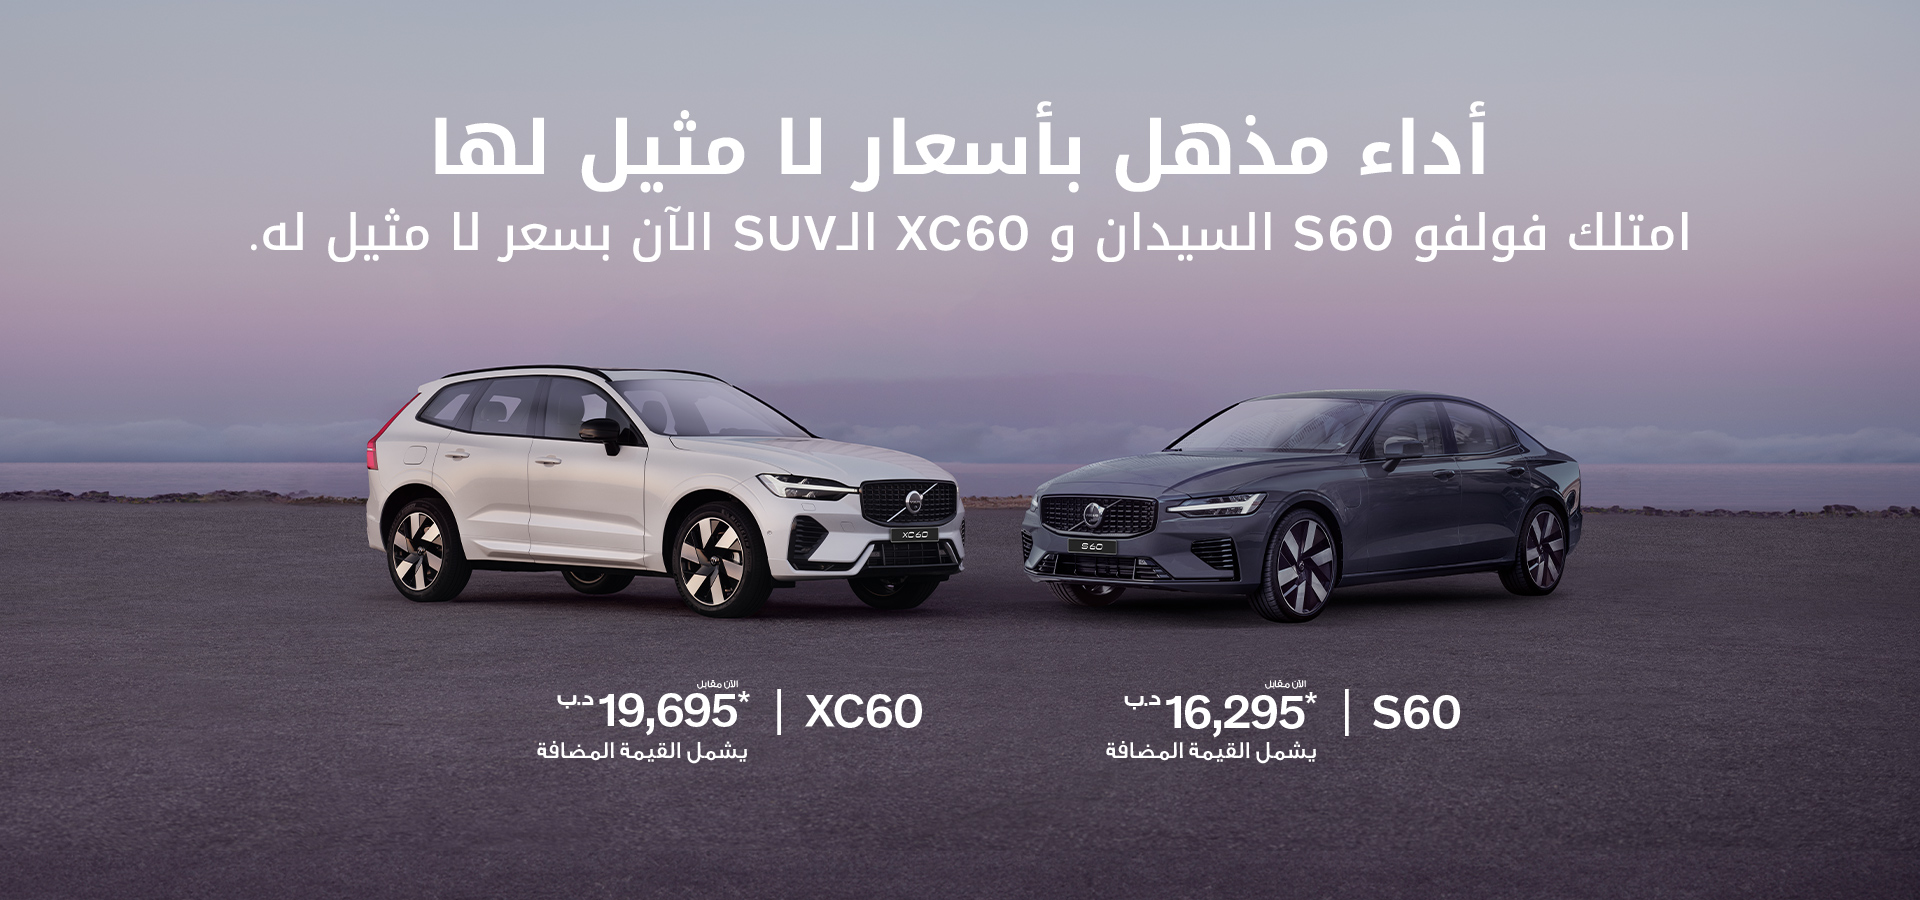 Own a Volvo starting from BD385* monthly